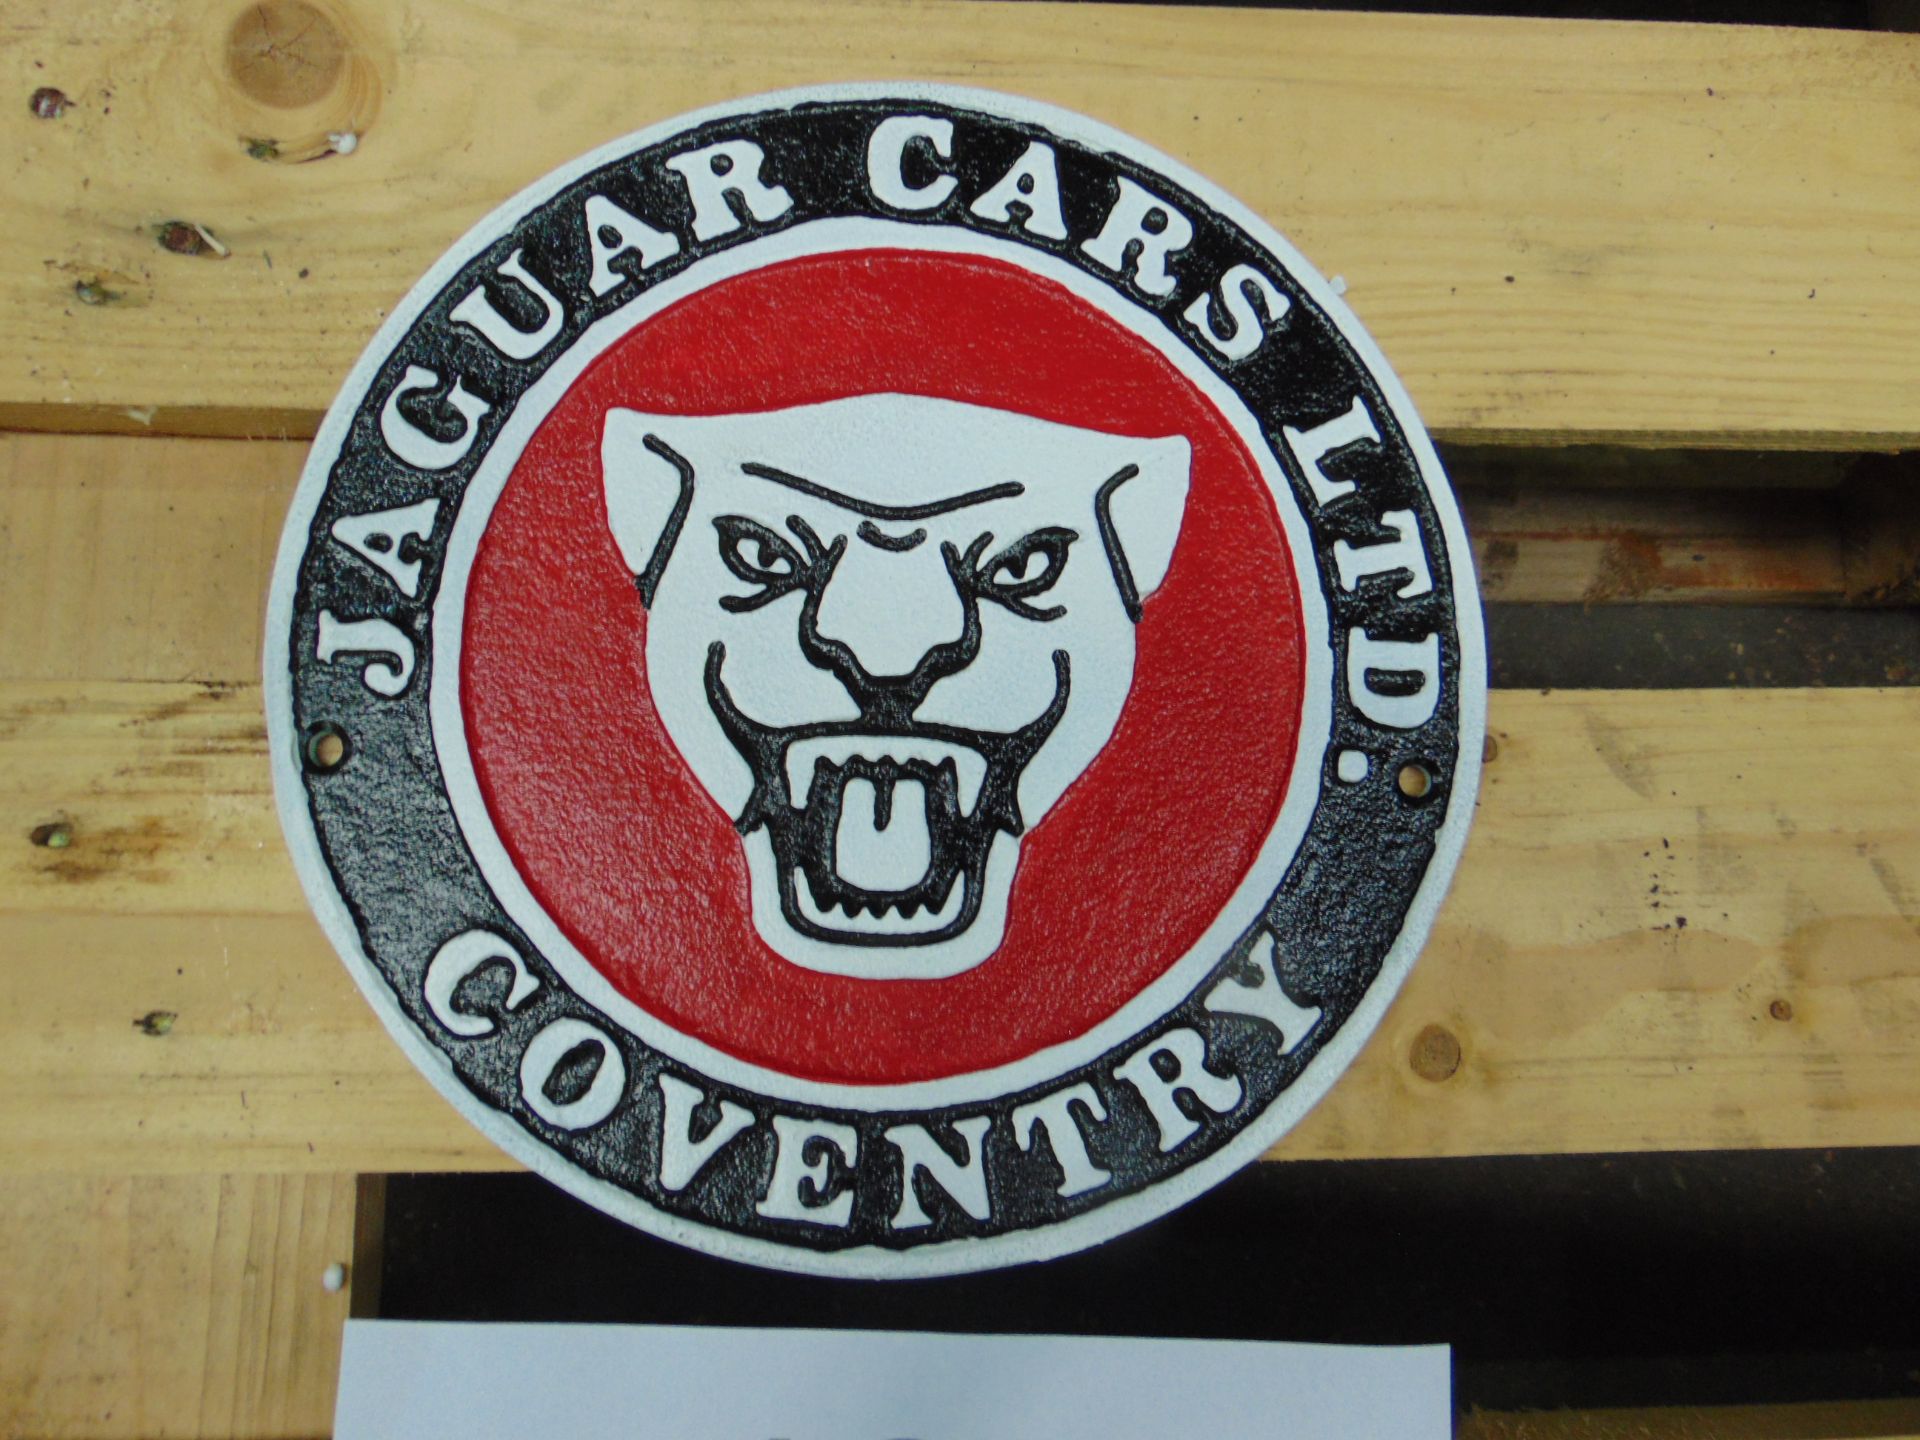 Jaquar Cars Coventry Hand Painted Cast Iron Wall Sign as Shown - Image 2 of 2